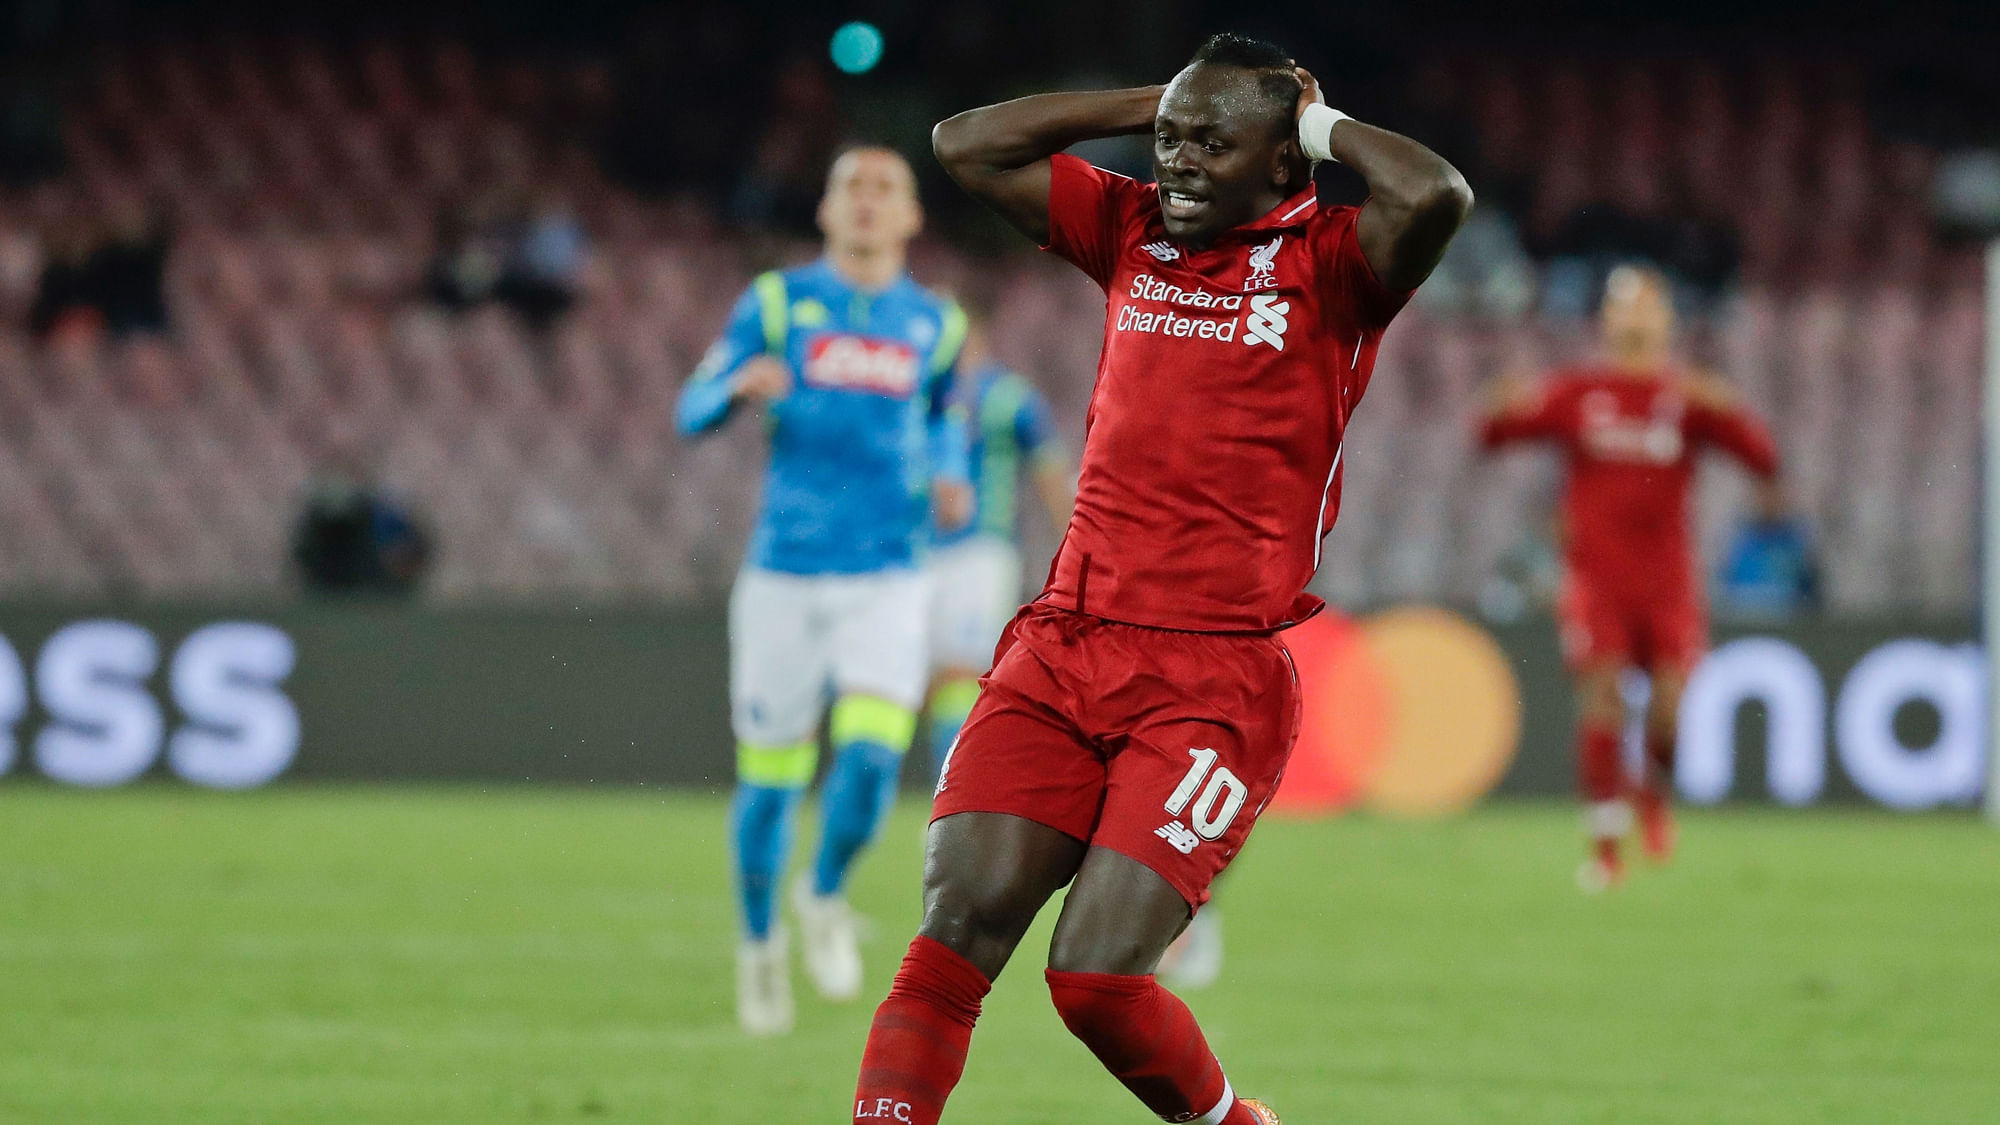 Liverpool midfielder Sadio Mane reacts during the Champions League match against Napoli.